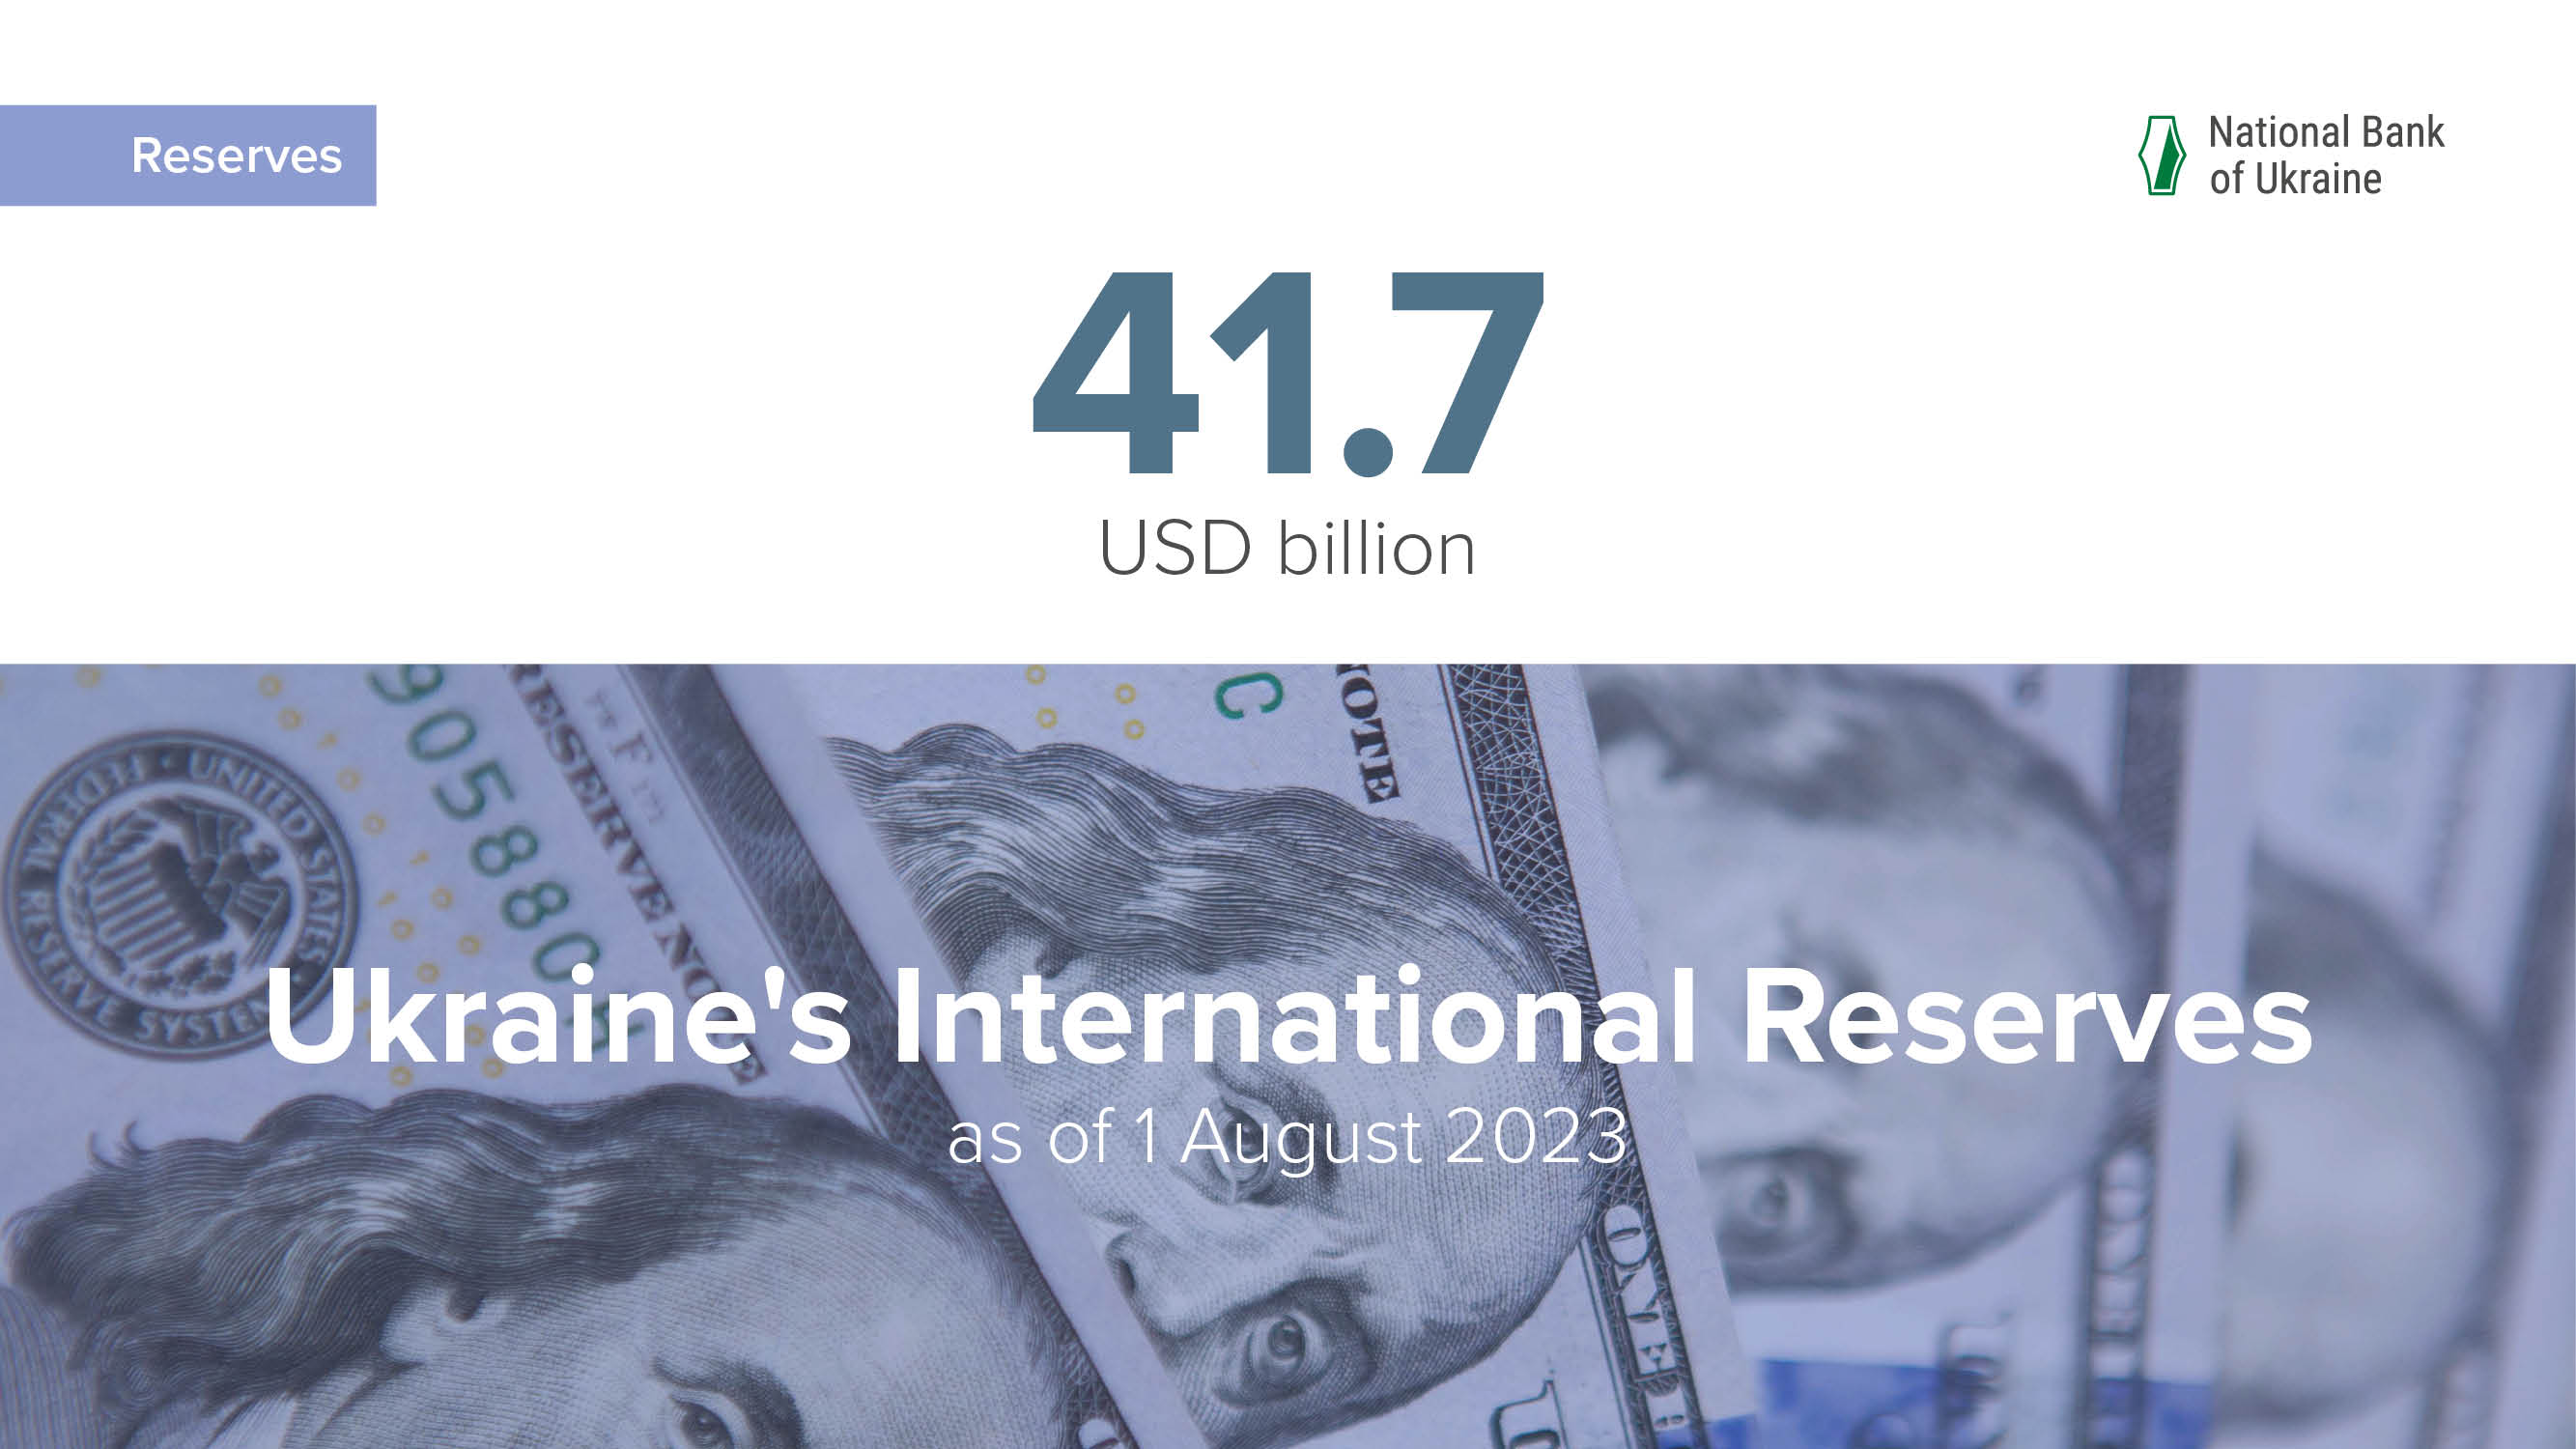 International Reserves Amount to USD 41.7 billion in July, a New Record High for Independent Ukraine